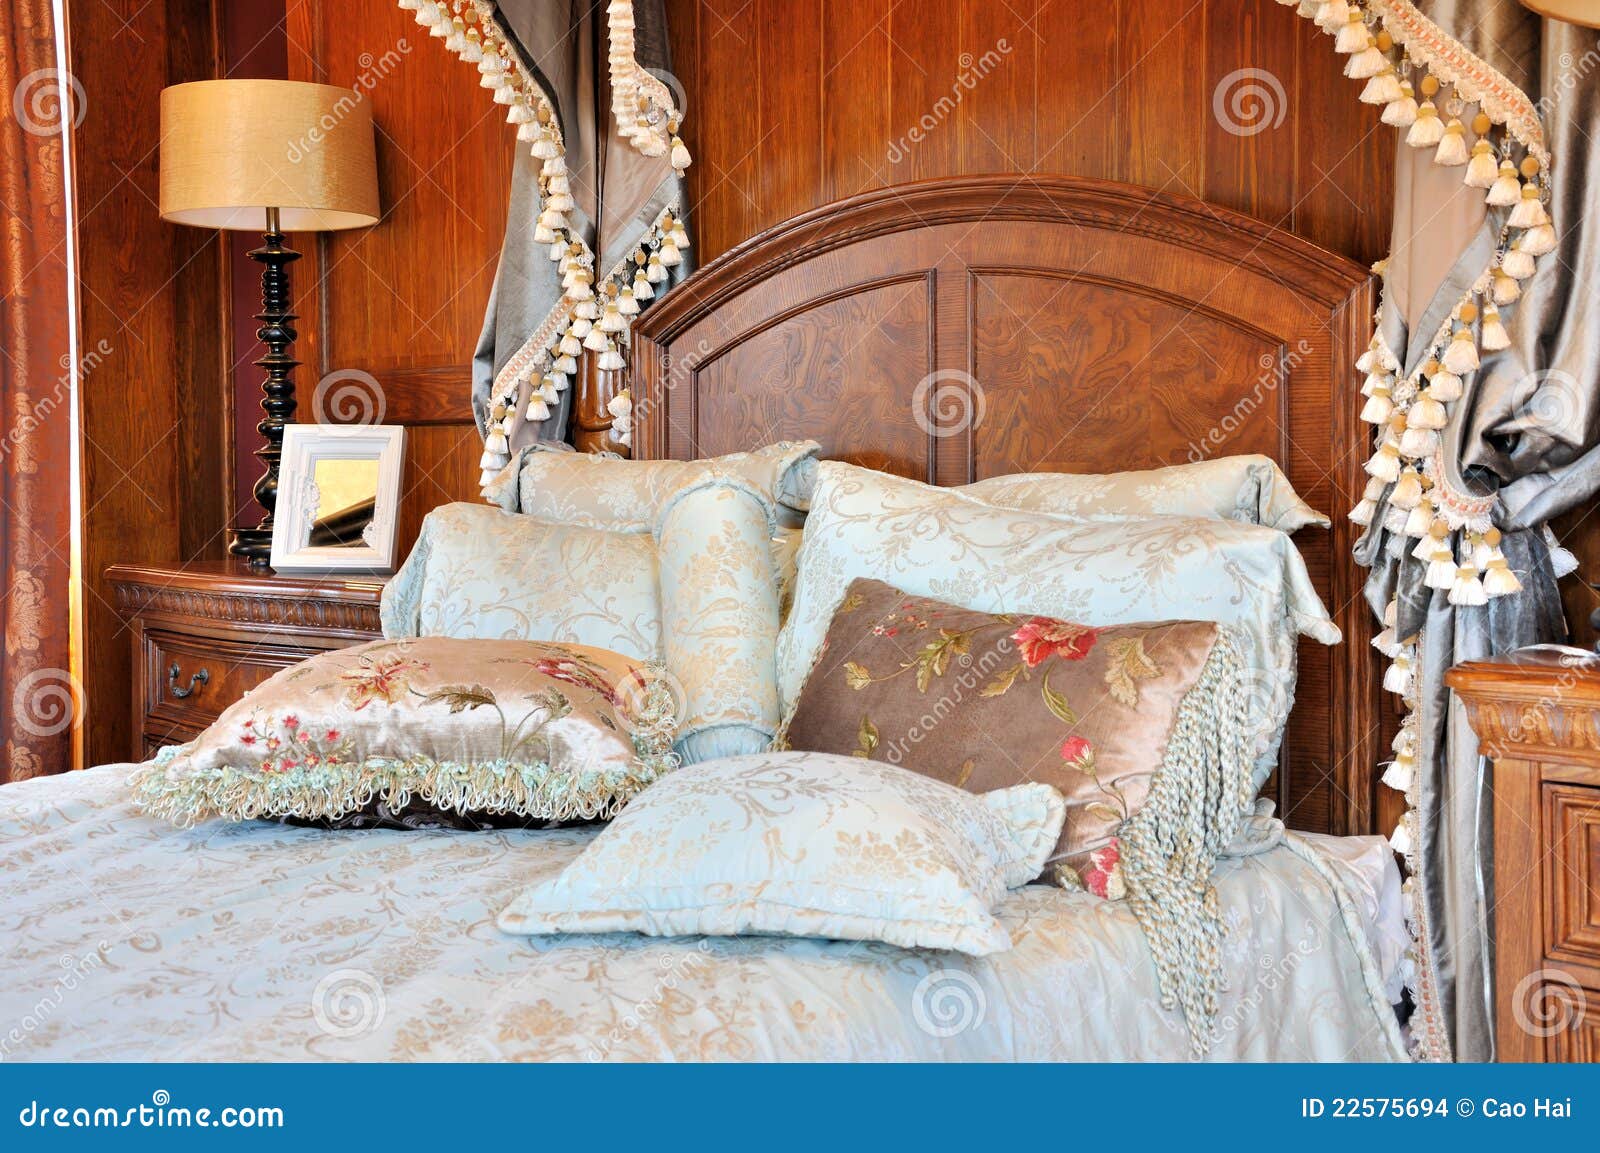 fancy bedroom with flowery curtain